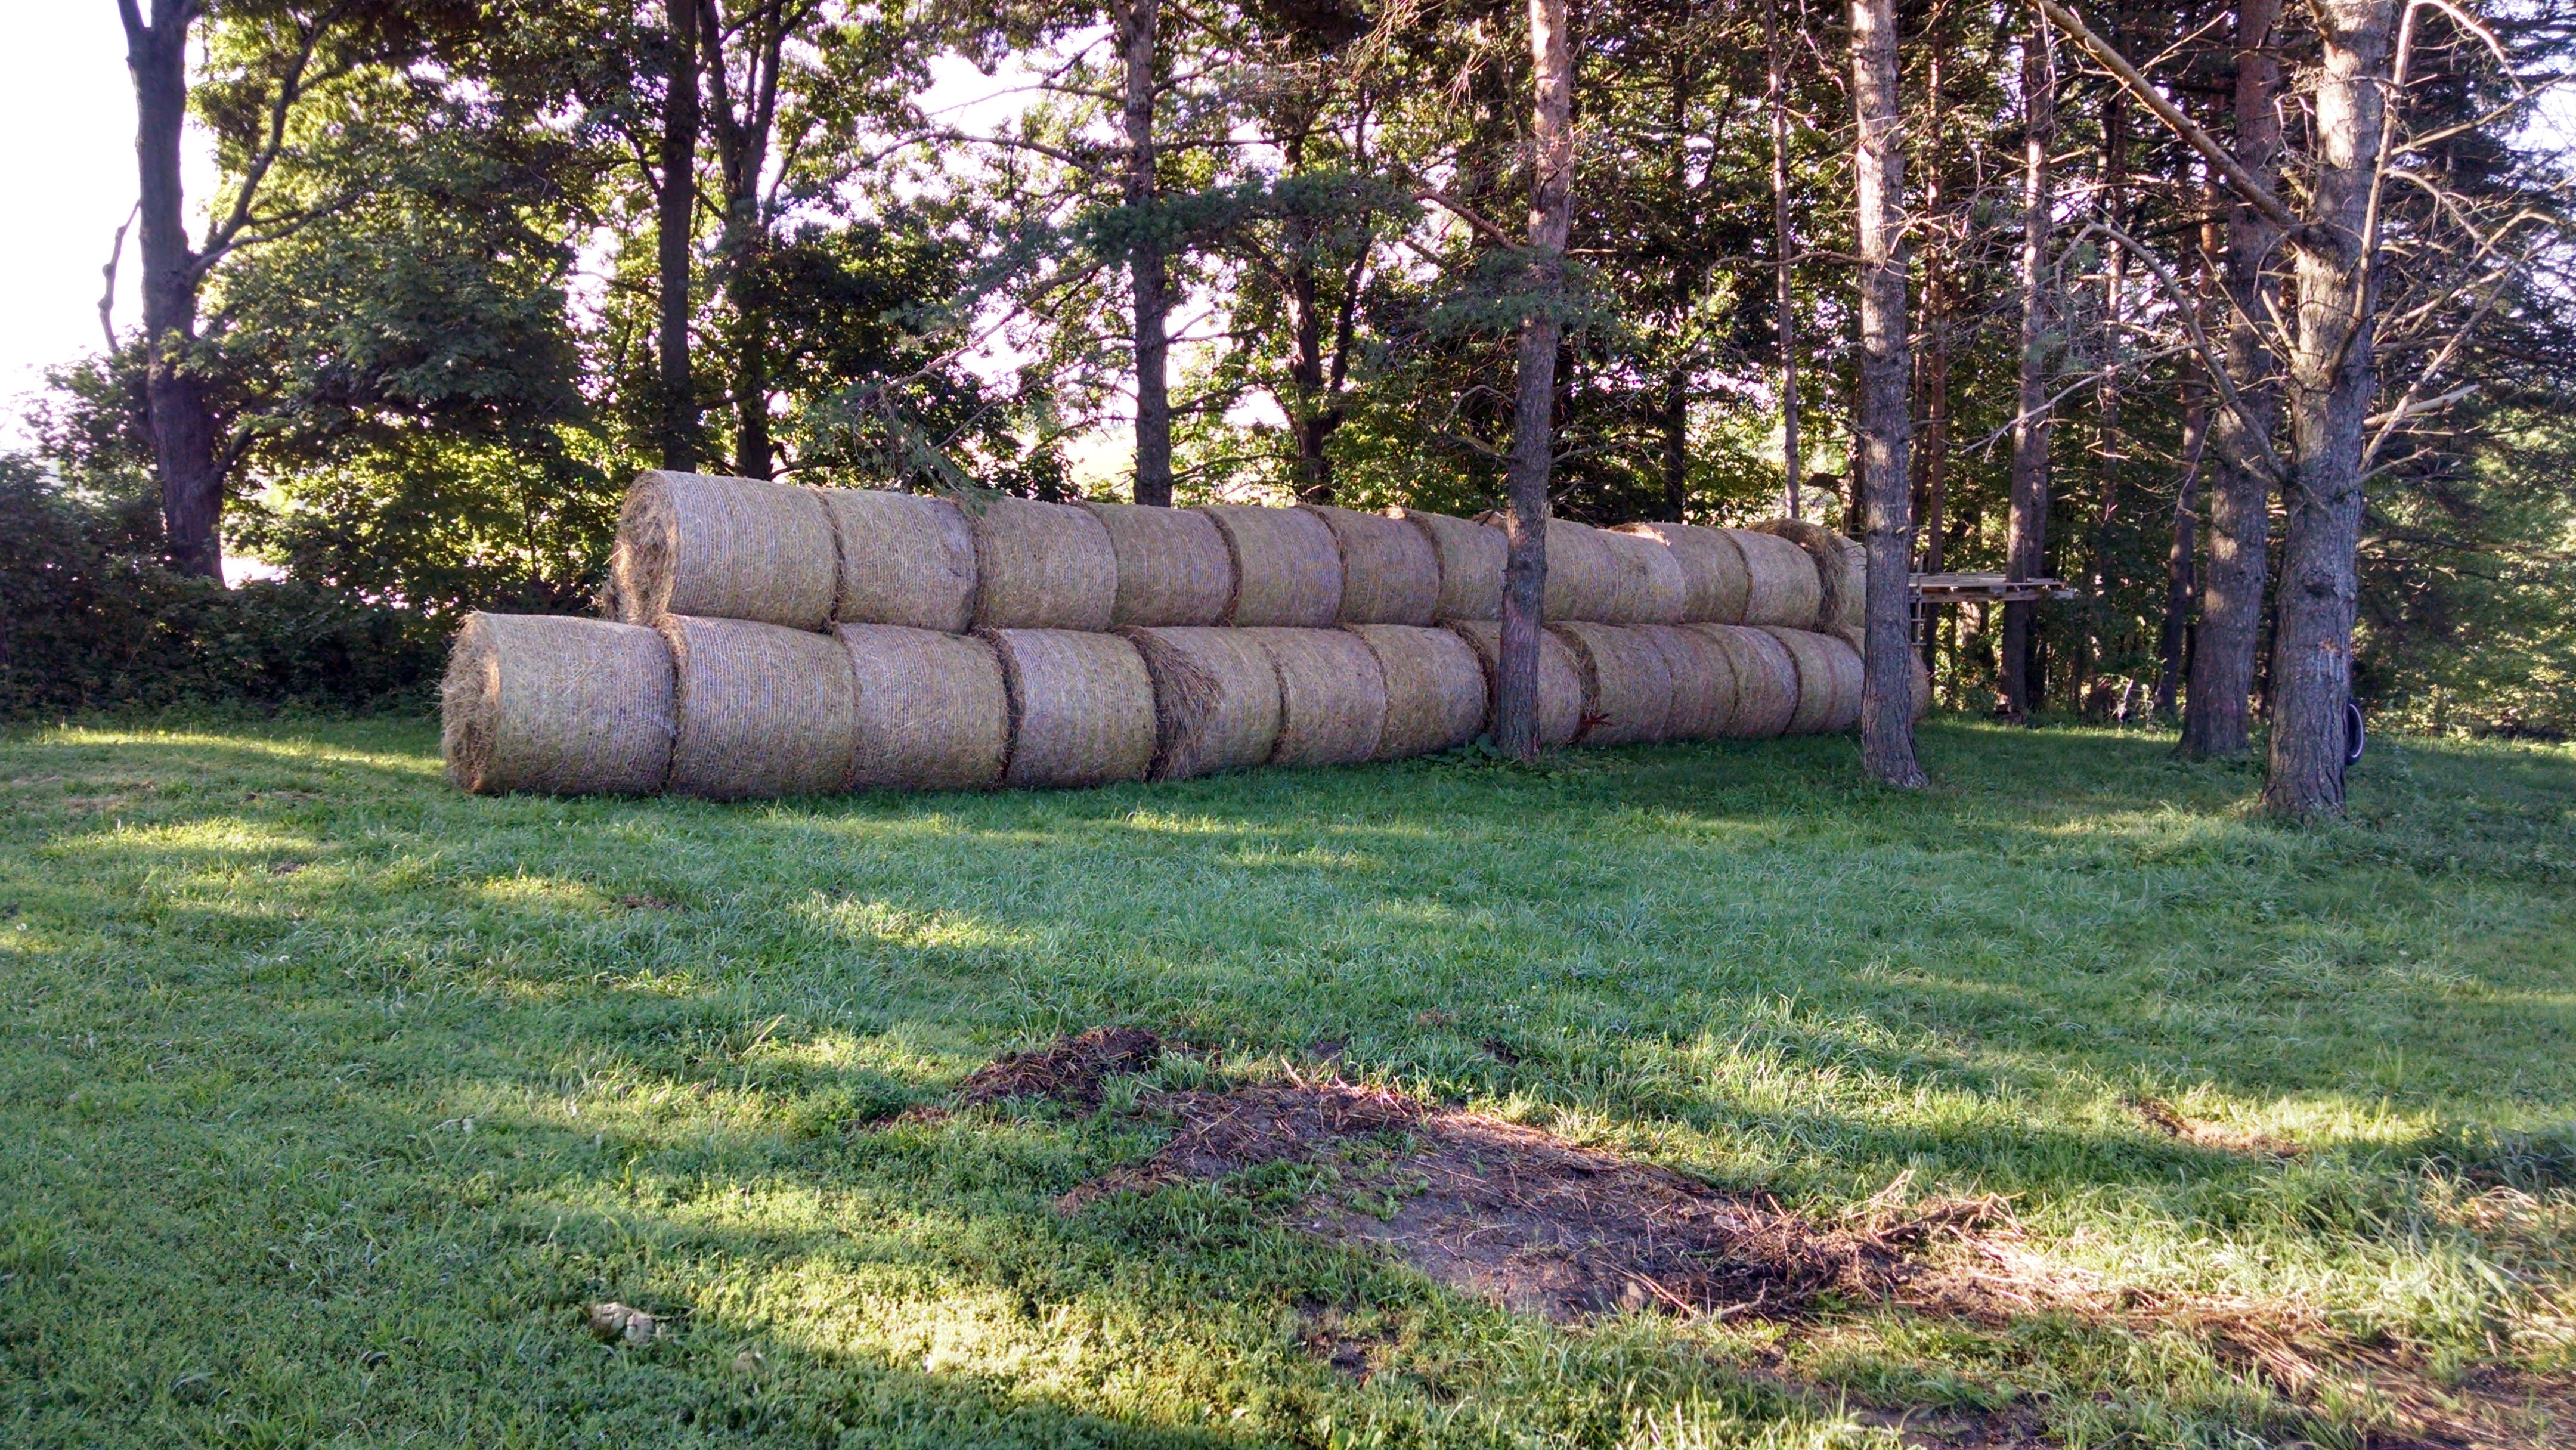 The upper hay pile.